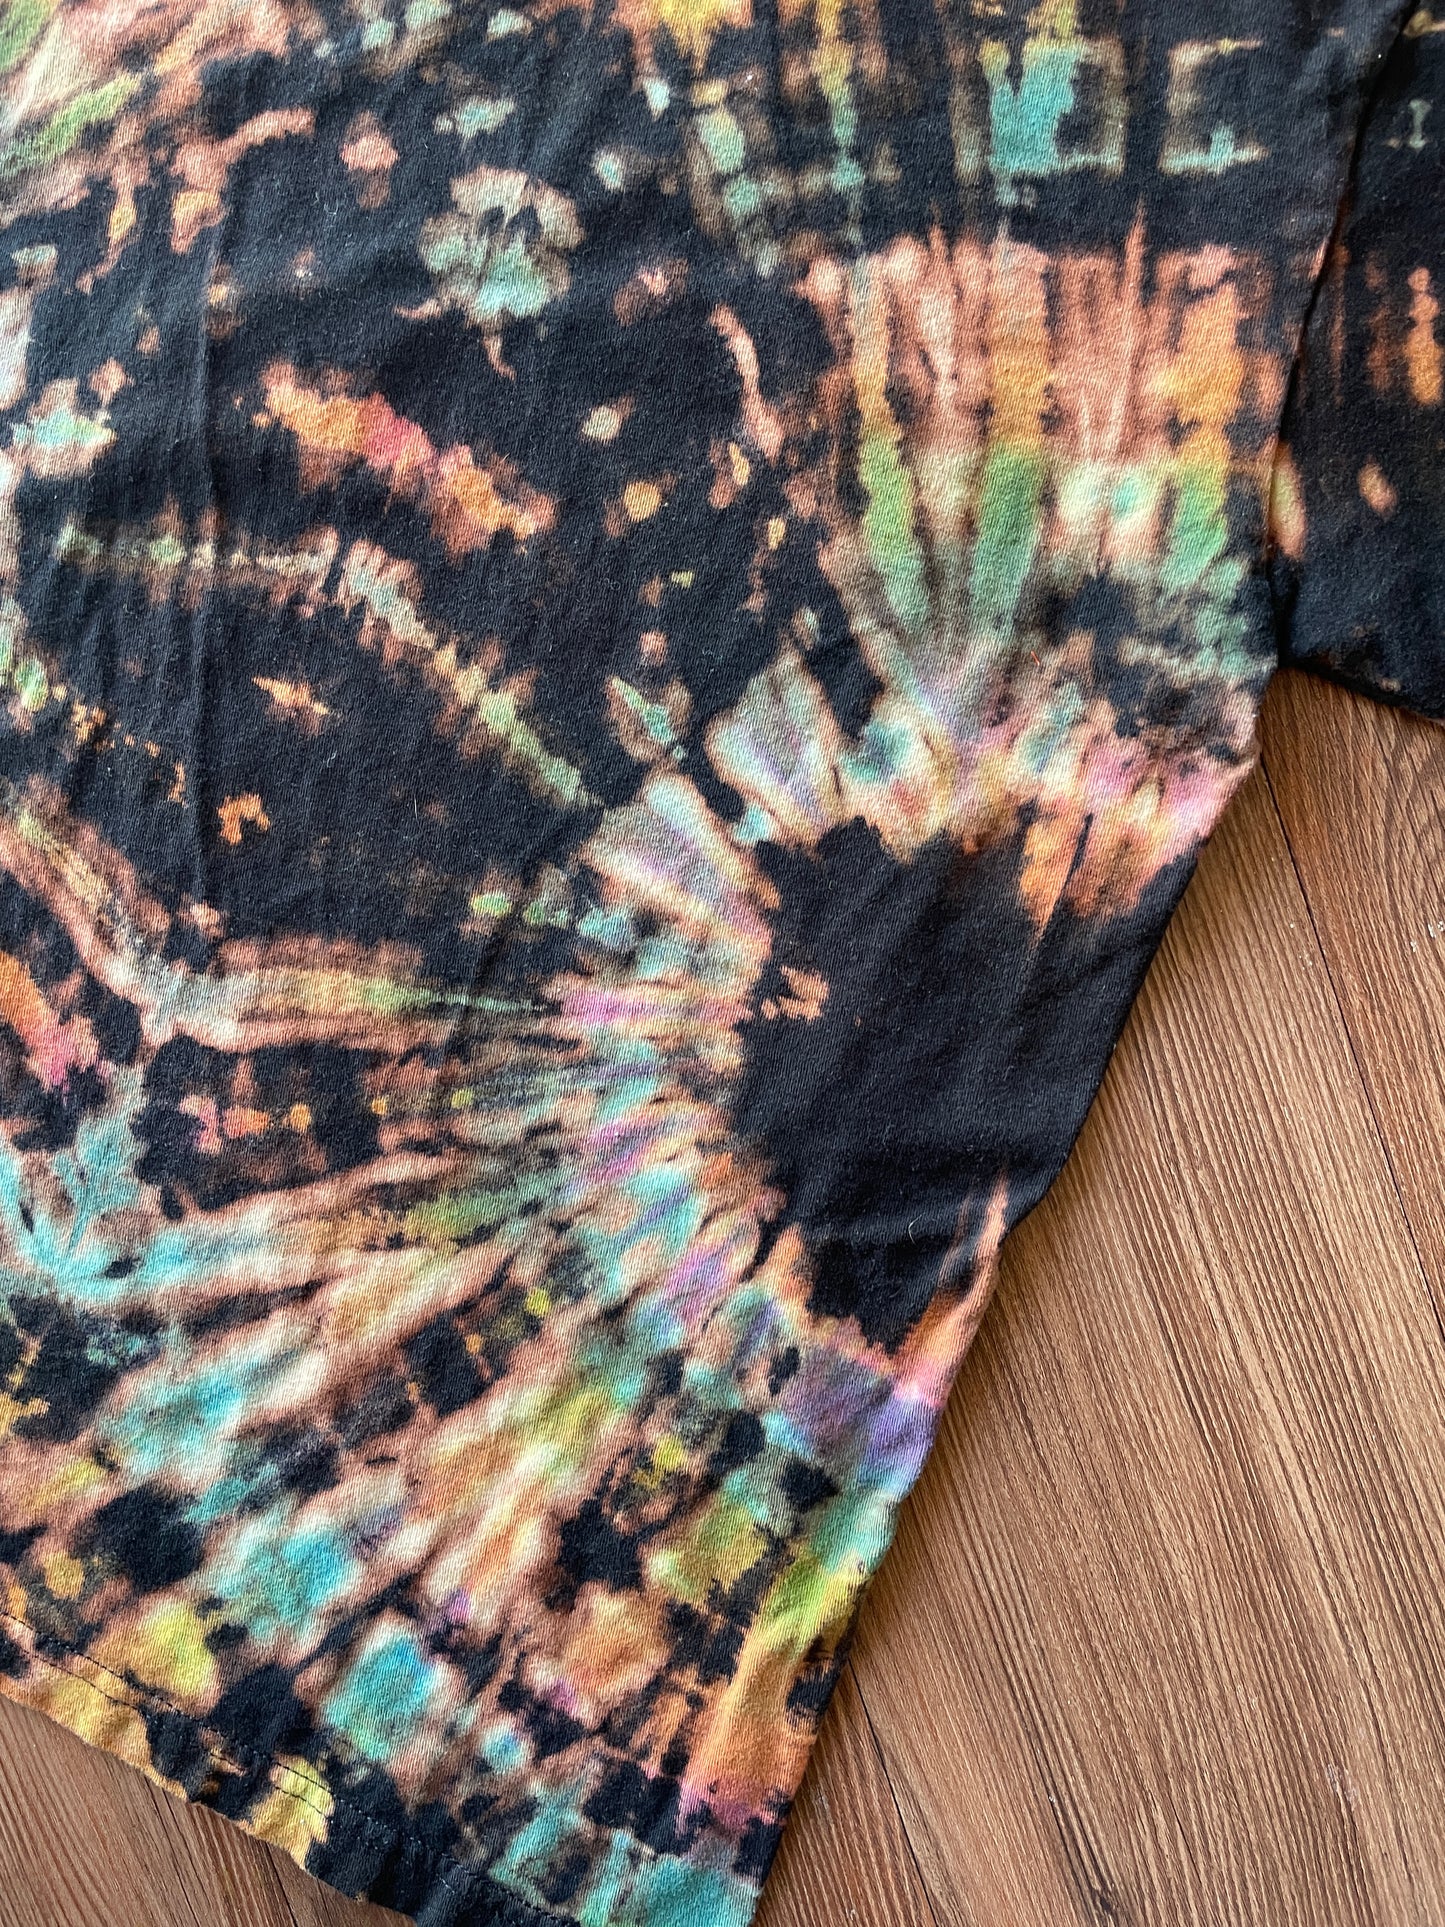 MEDIUM Men’s Nirvana Come As You Are Handmade Tie Dye T-Shirt | One-Of-a-Kind Pastel Rainbow and Black Short Sleeve